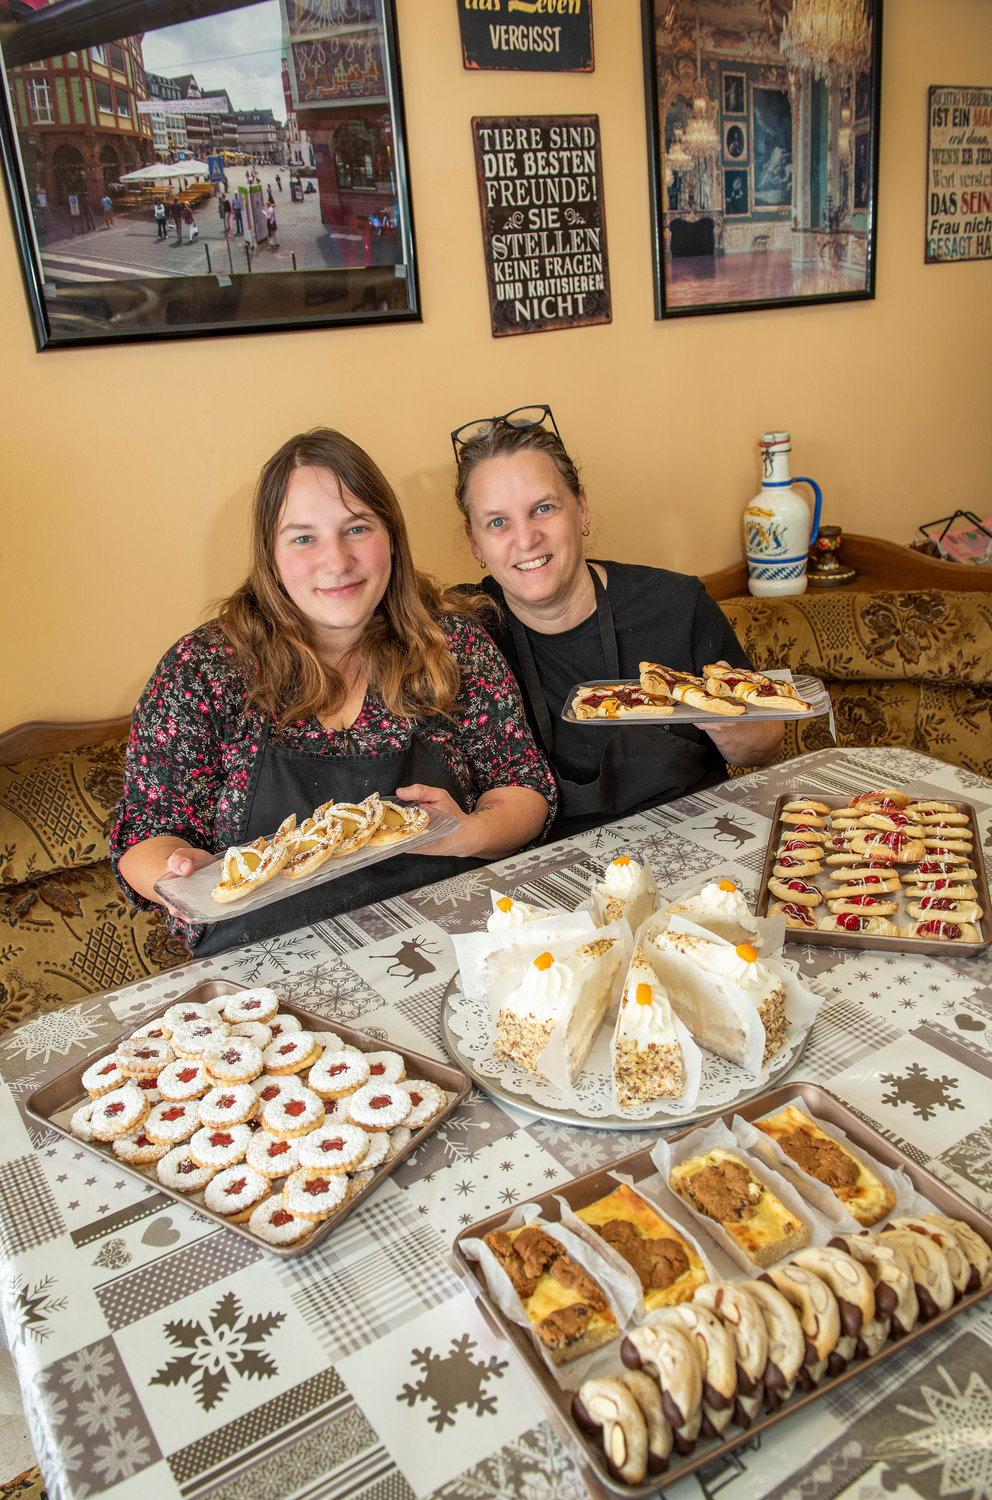 Petra Volcy and her daughter Nadine Dobeneck present authentic German bakery items, including pastries, linzer cookies and slices of German cheesecake.